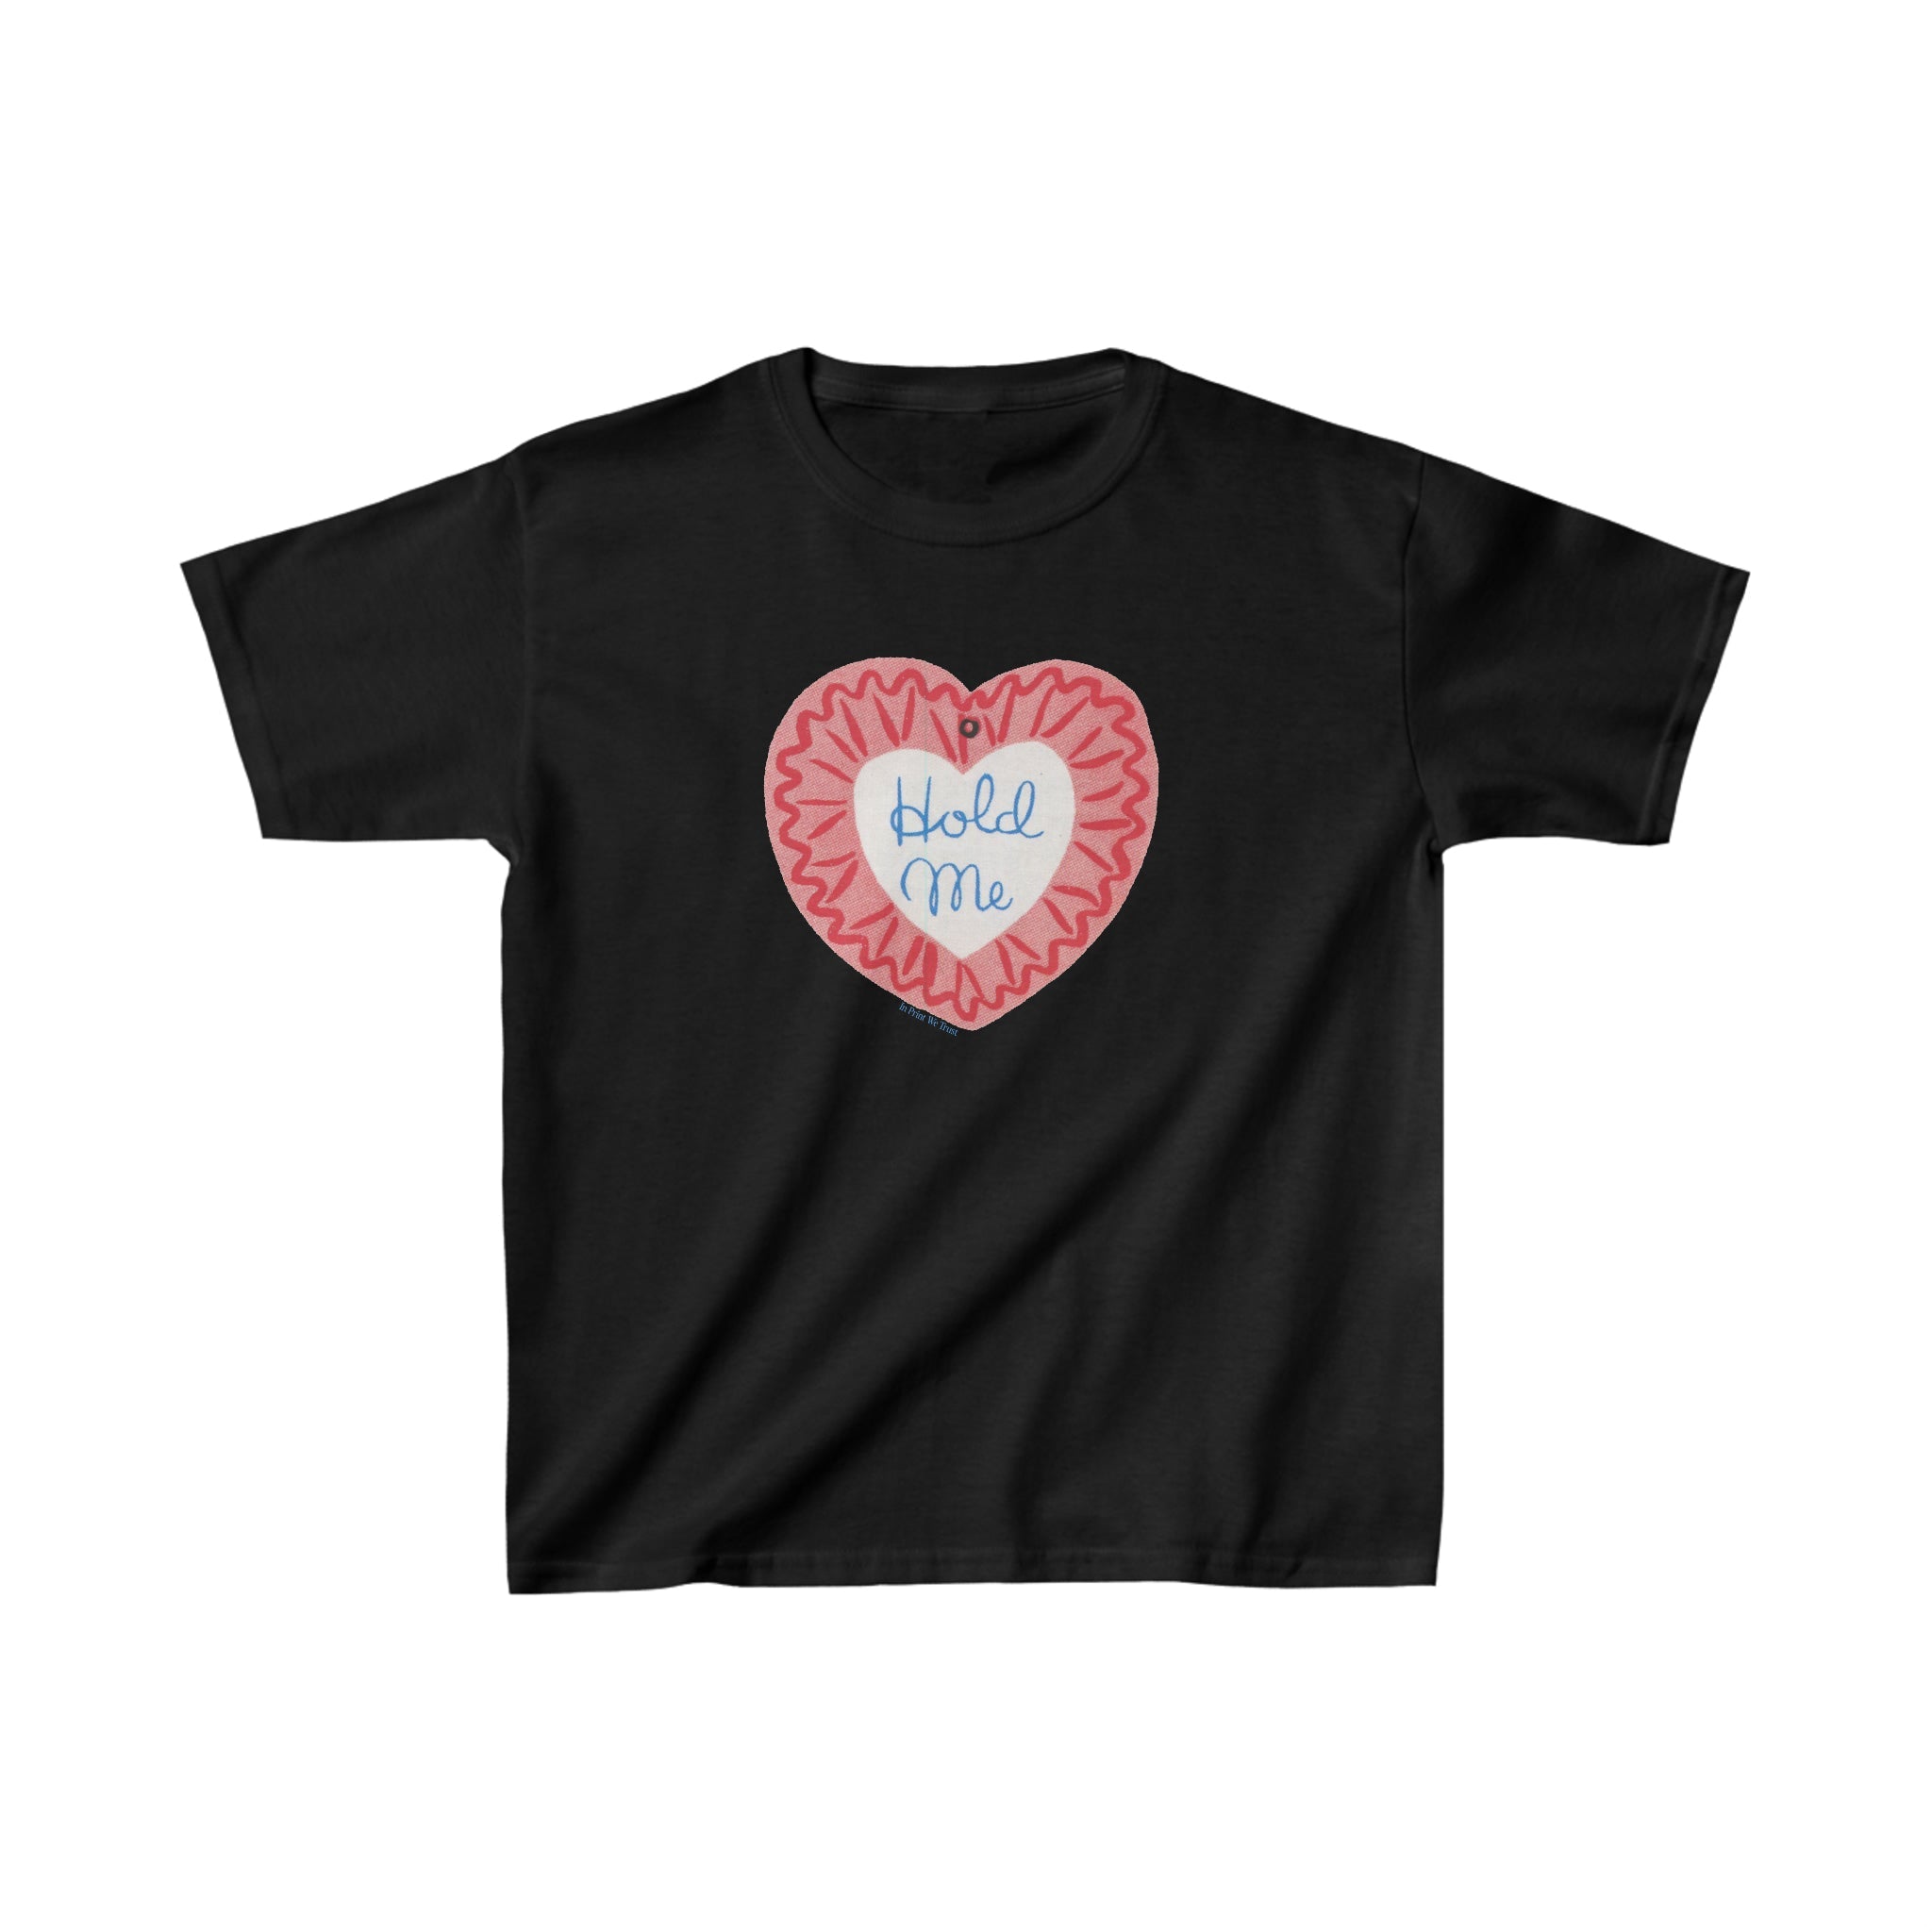 'Hold Me' baby tee - In Print We Trust